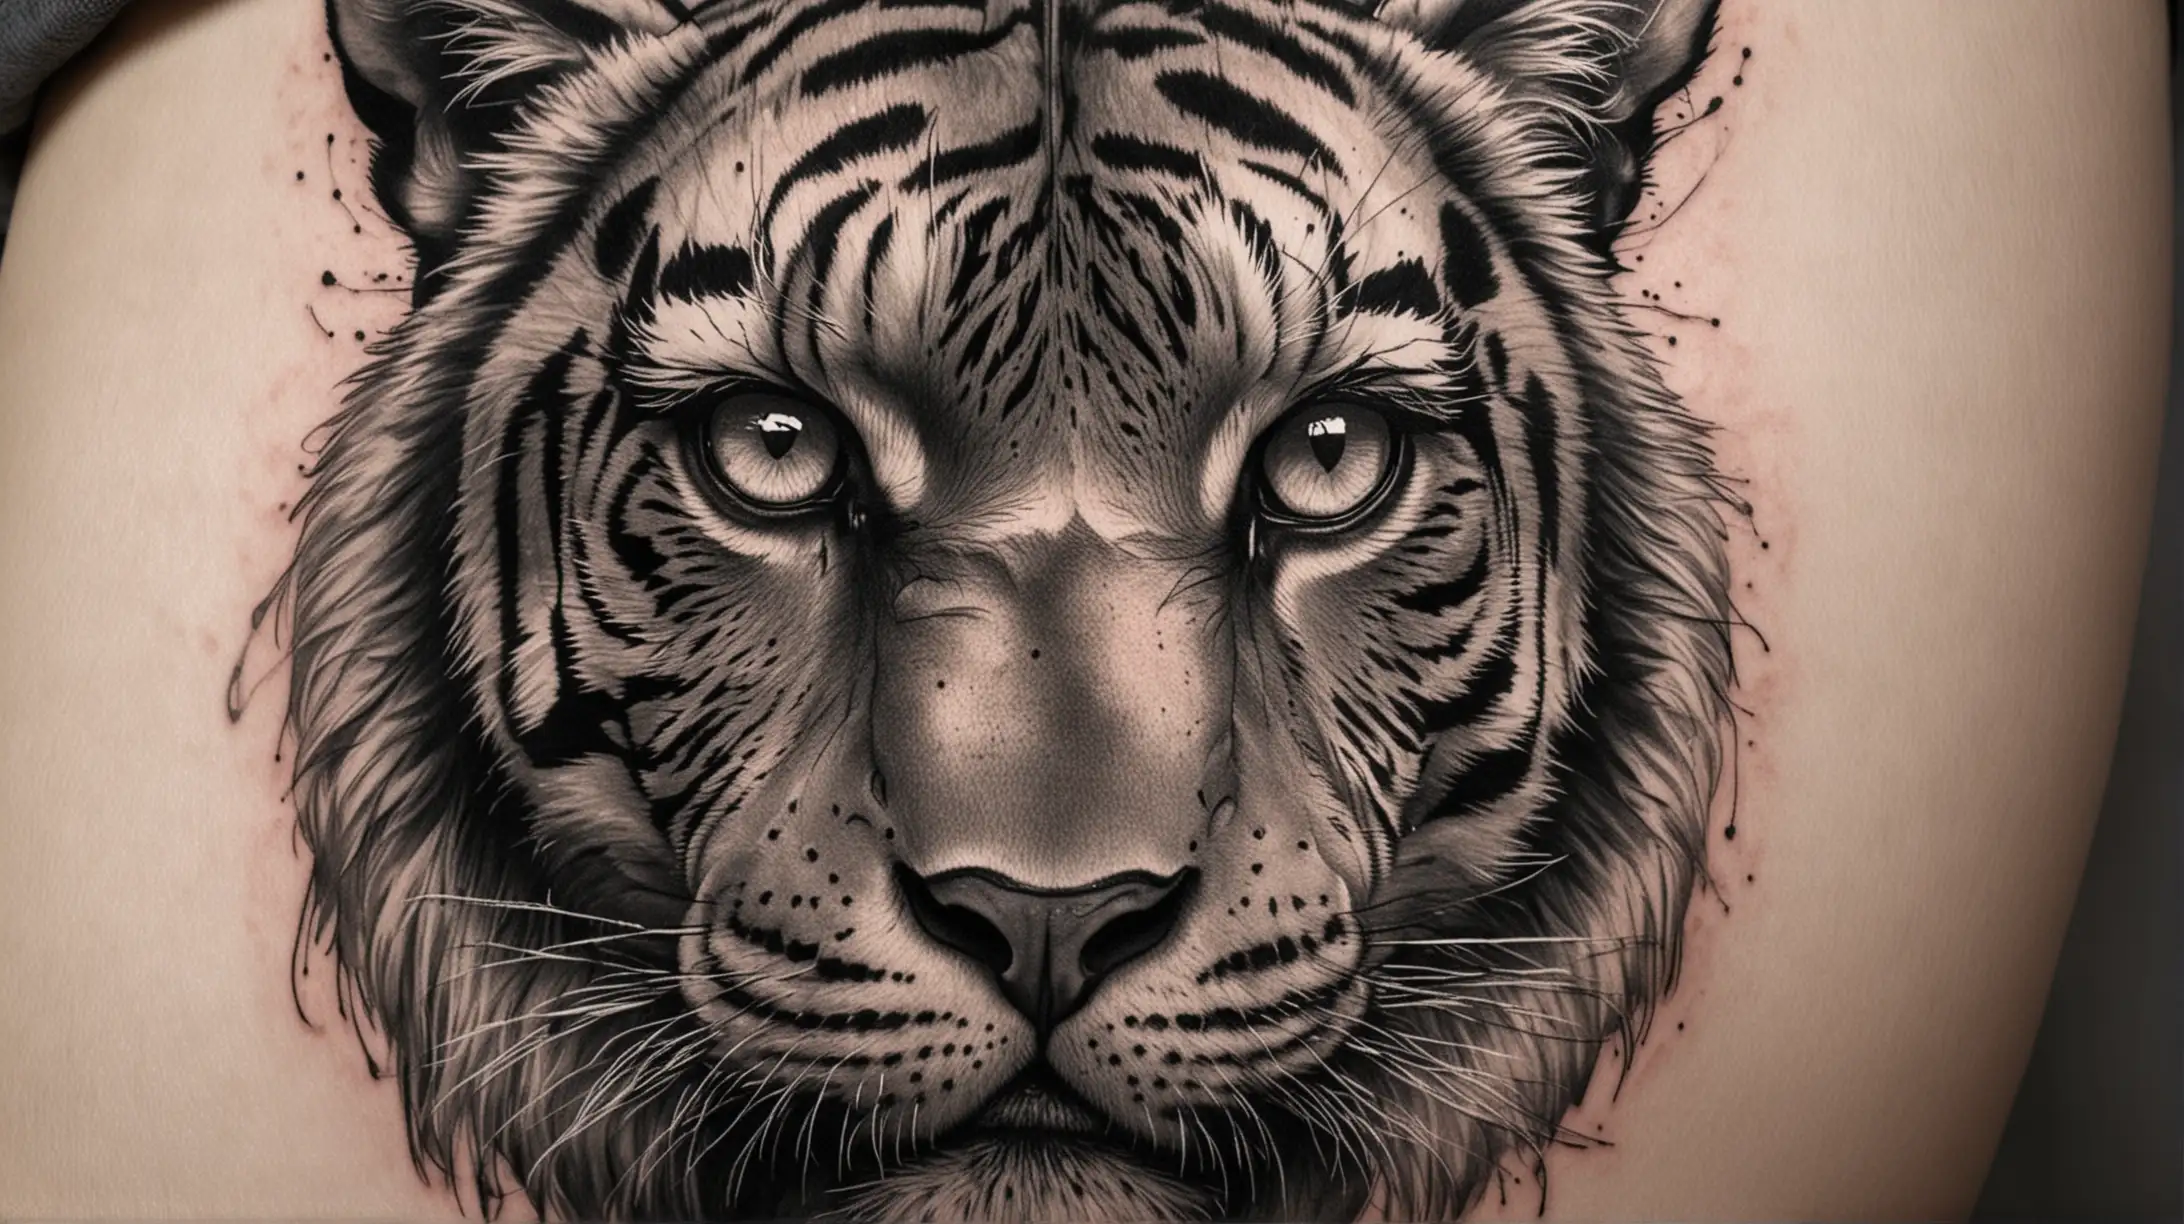 Realistic Tiger Eye Tattoo Design in Black and Gray